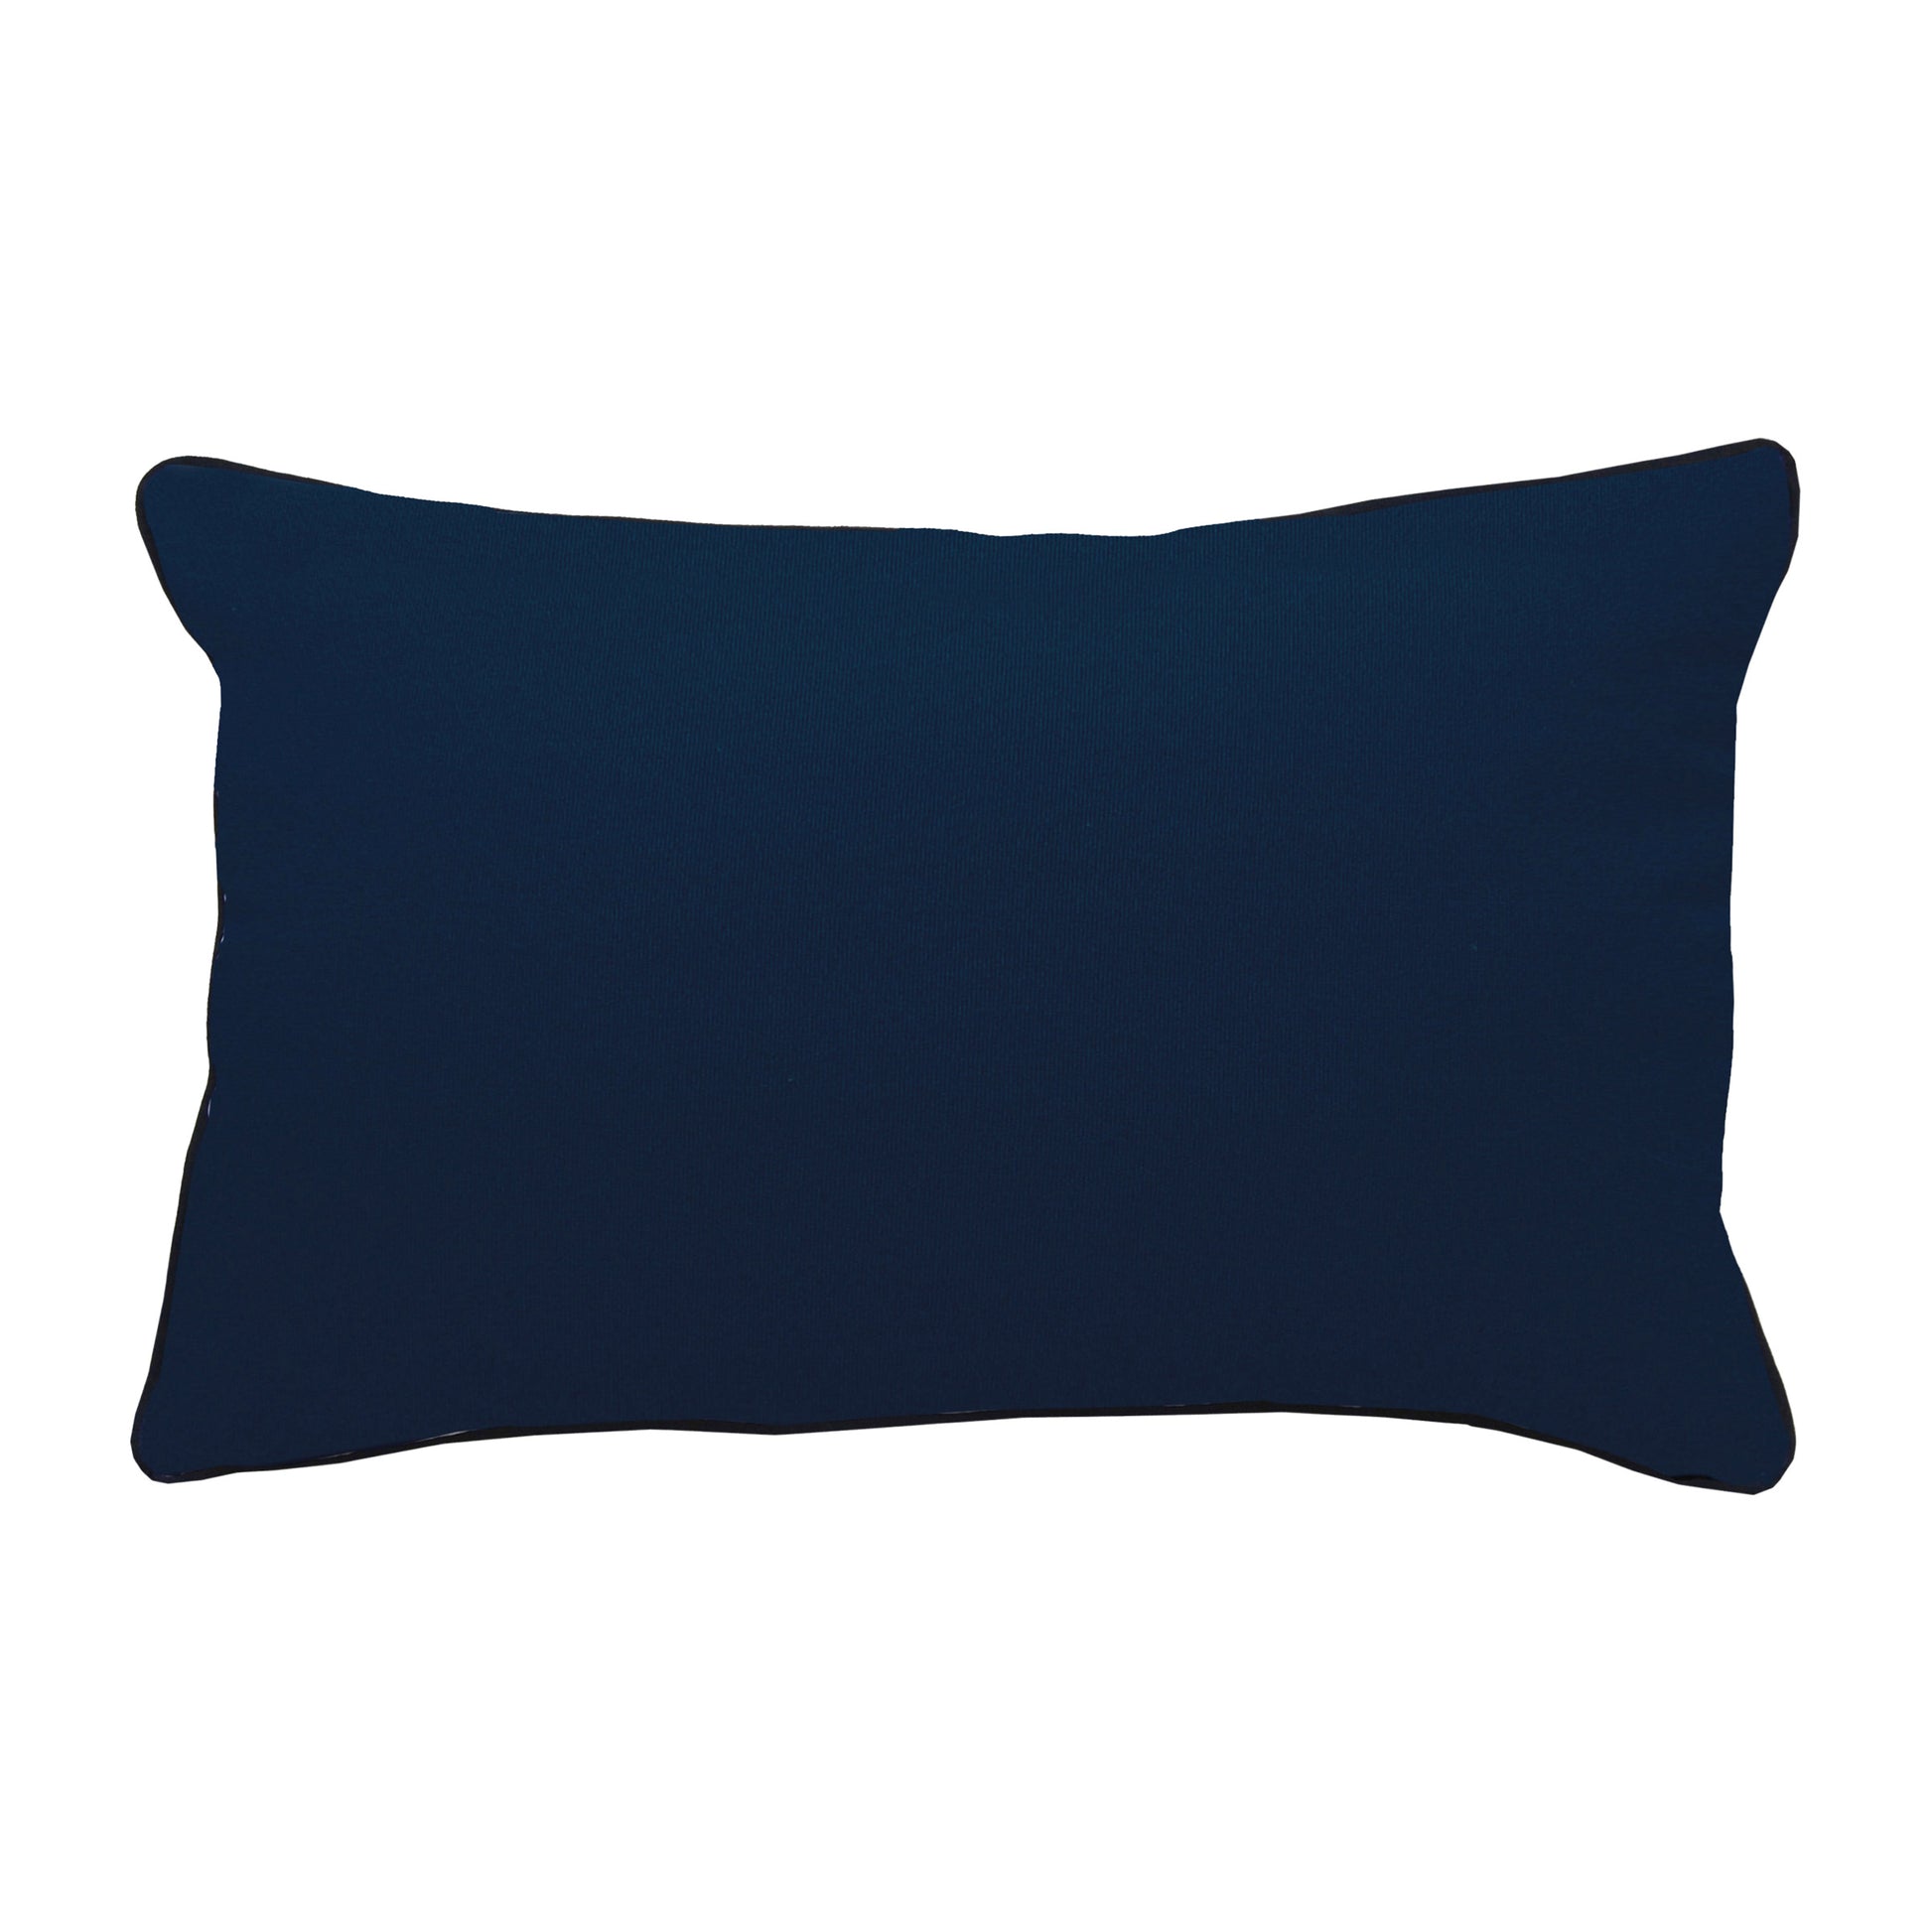 Solid navy fabric; the back of the Geo Pattern Nautical pillow.